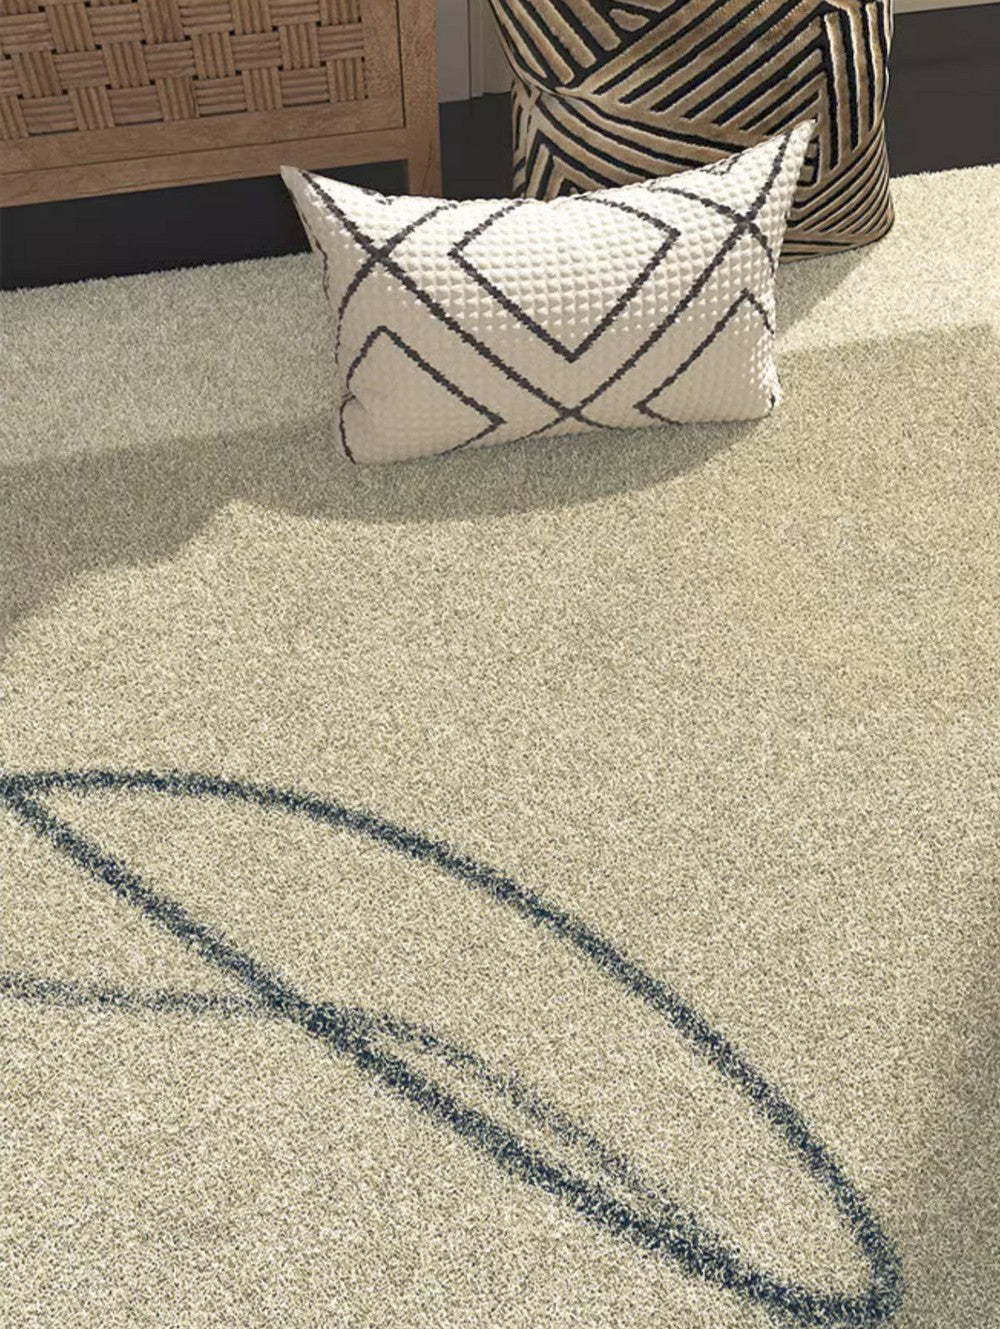 Simple Modern Rug Ideas for Bedroom, Abstract Modern Rugs for Living Room, Dining Room Modern Floor Carpets, Contemporary Modern Rugs Next to Bed